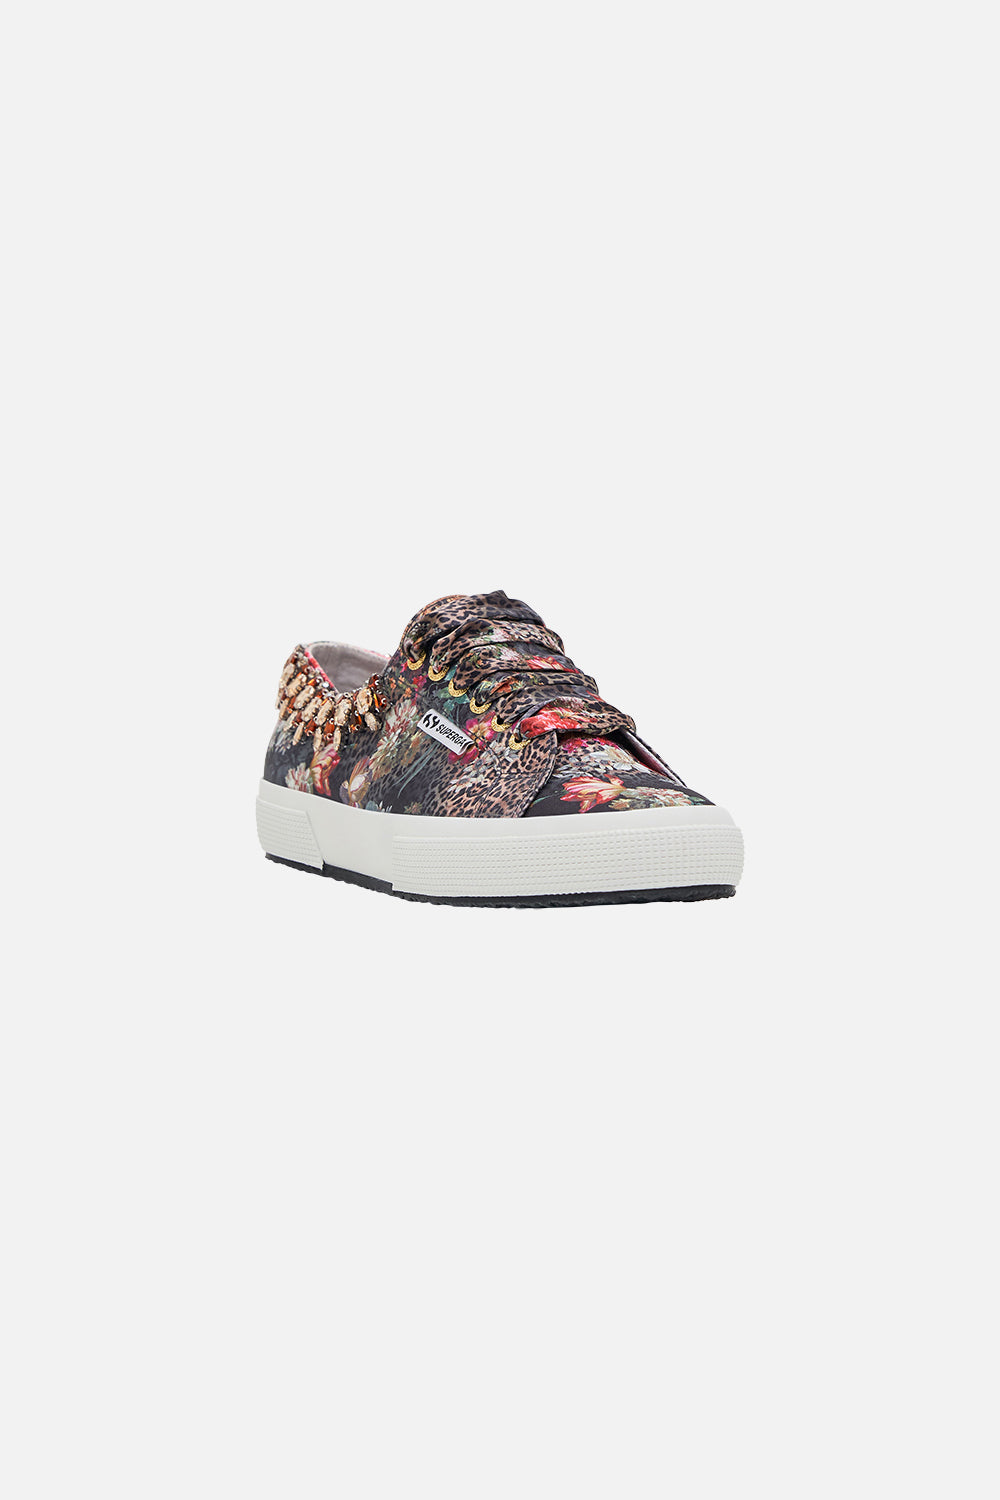 Superga x CAMILLA sneakers in A Night At The Opera print 